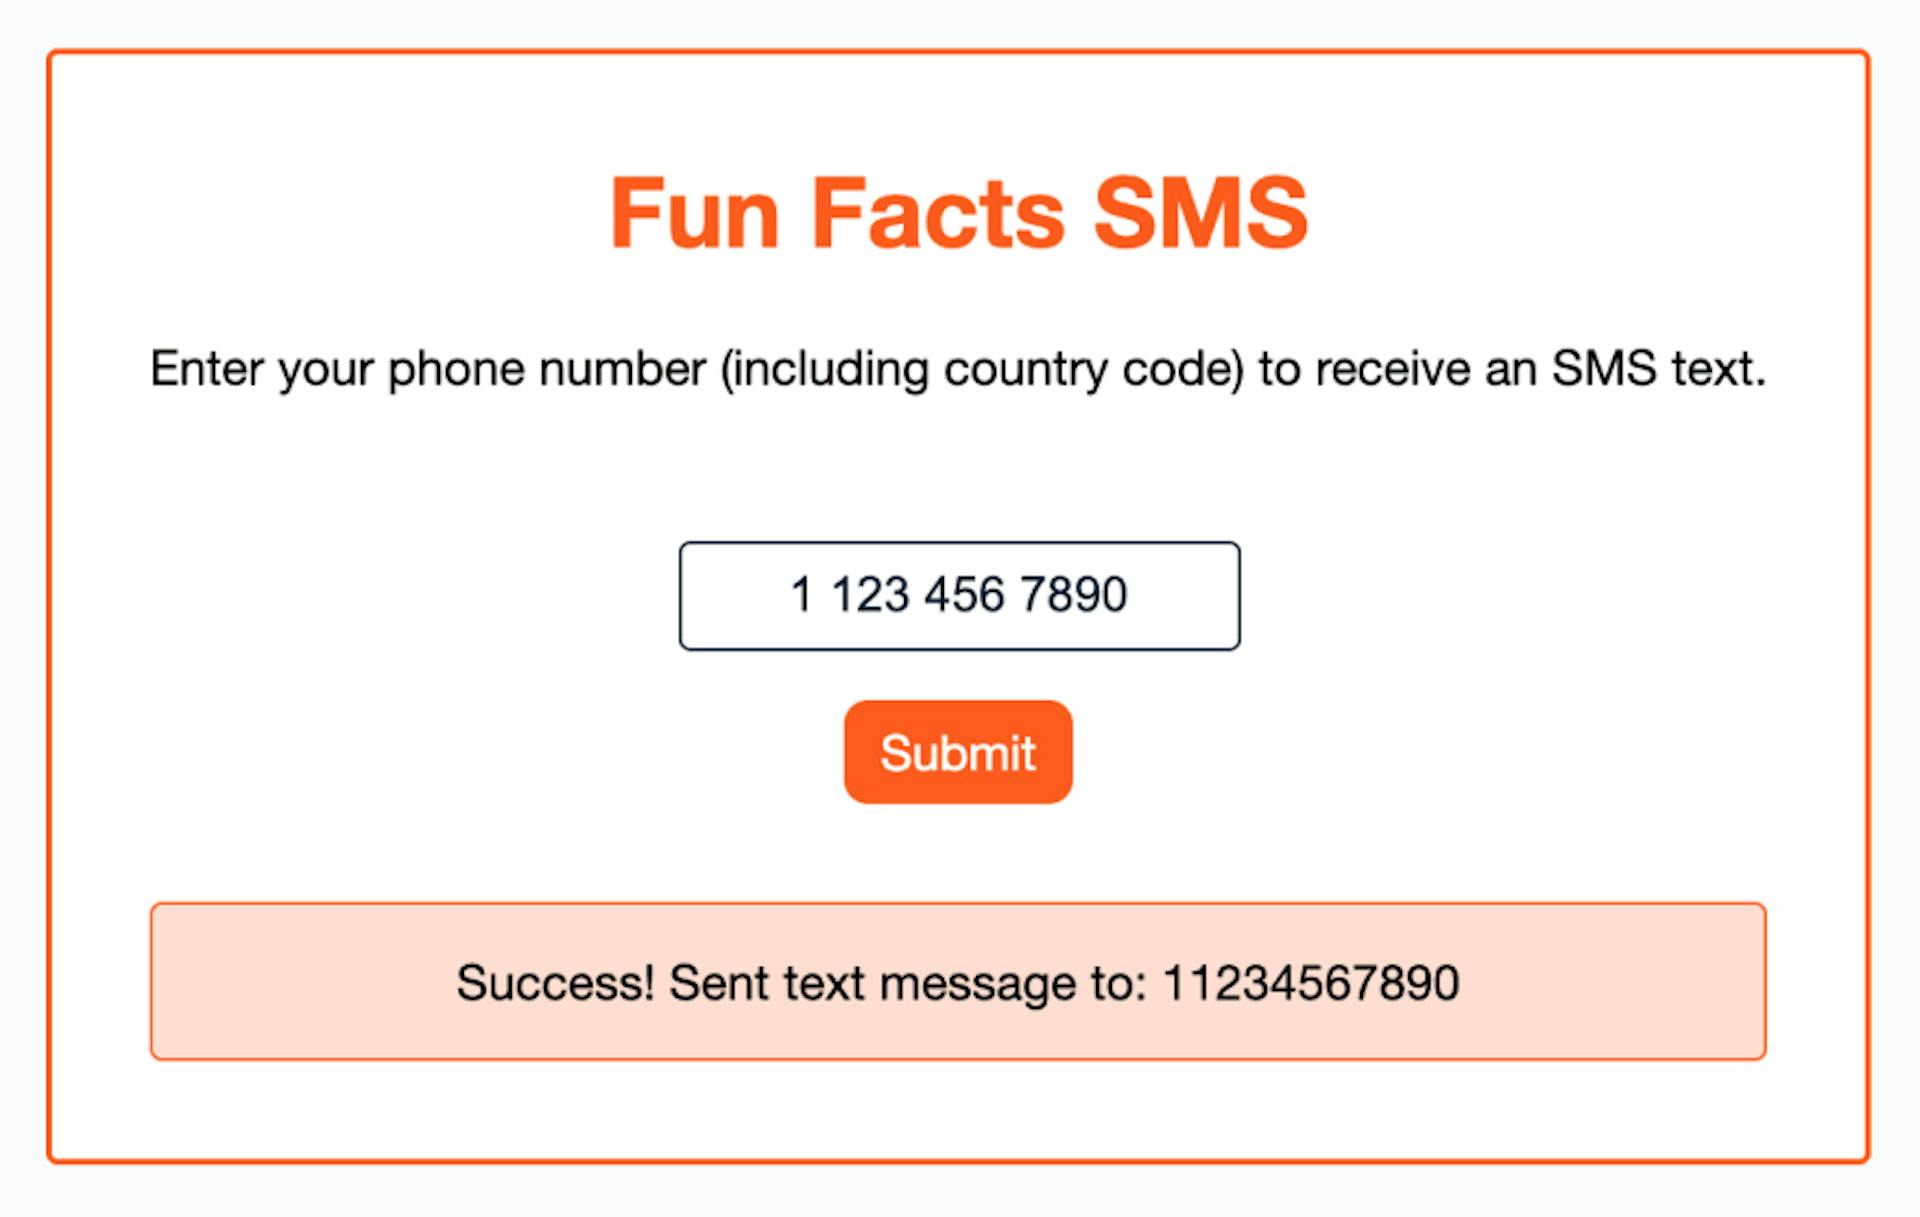 Demo app: Text message successfully sent